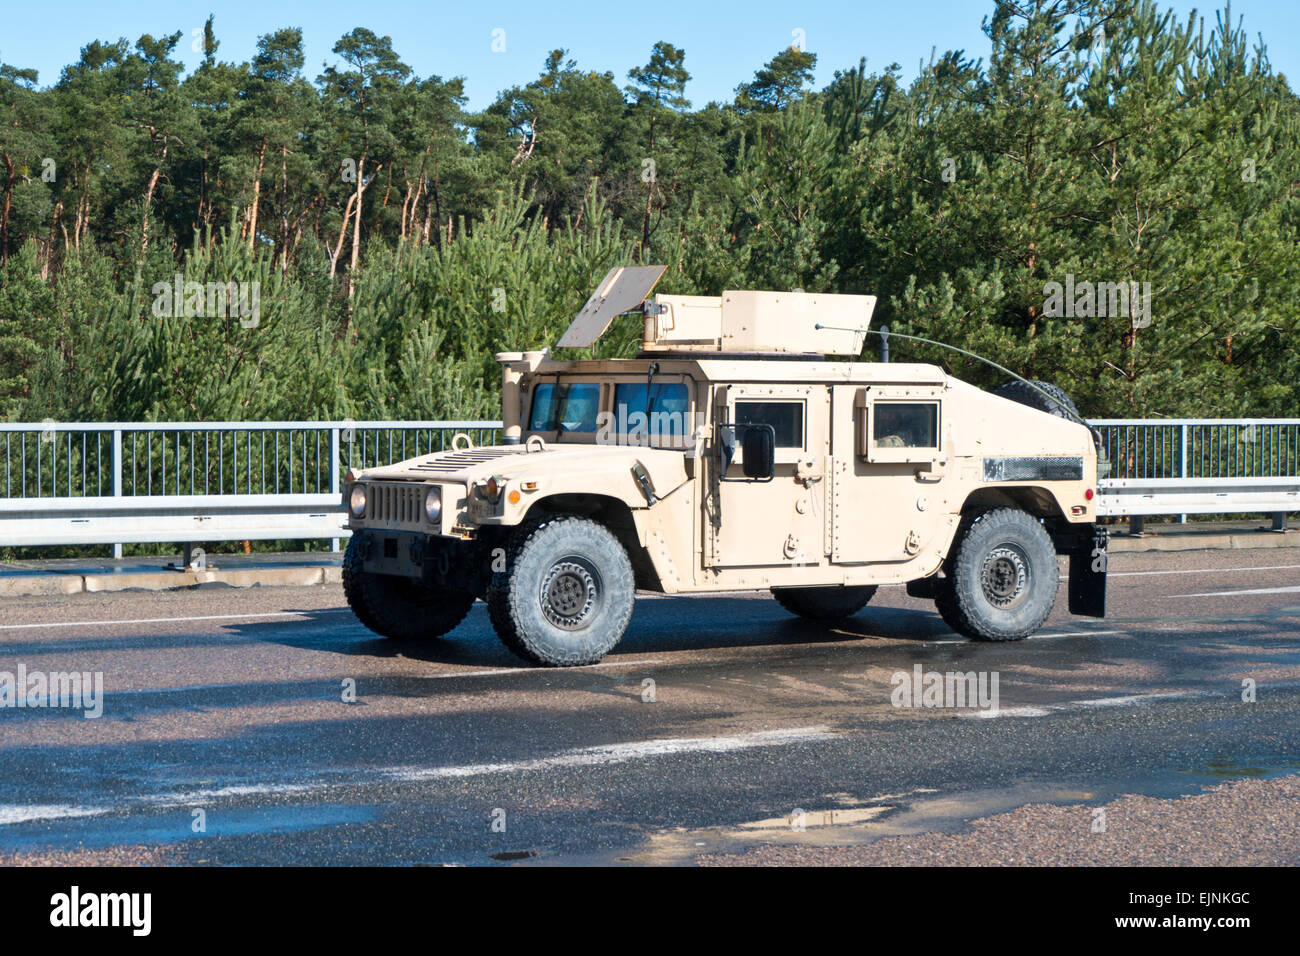 Demonstration of US army March 30, 2015 in Czech republic. Humvee Stock Photo